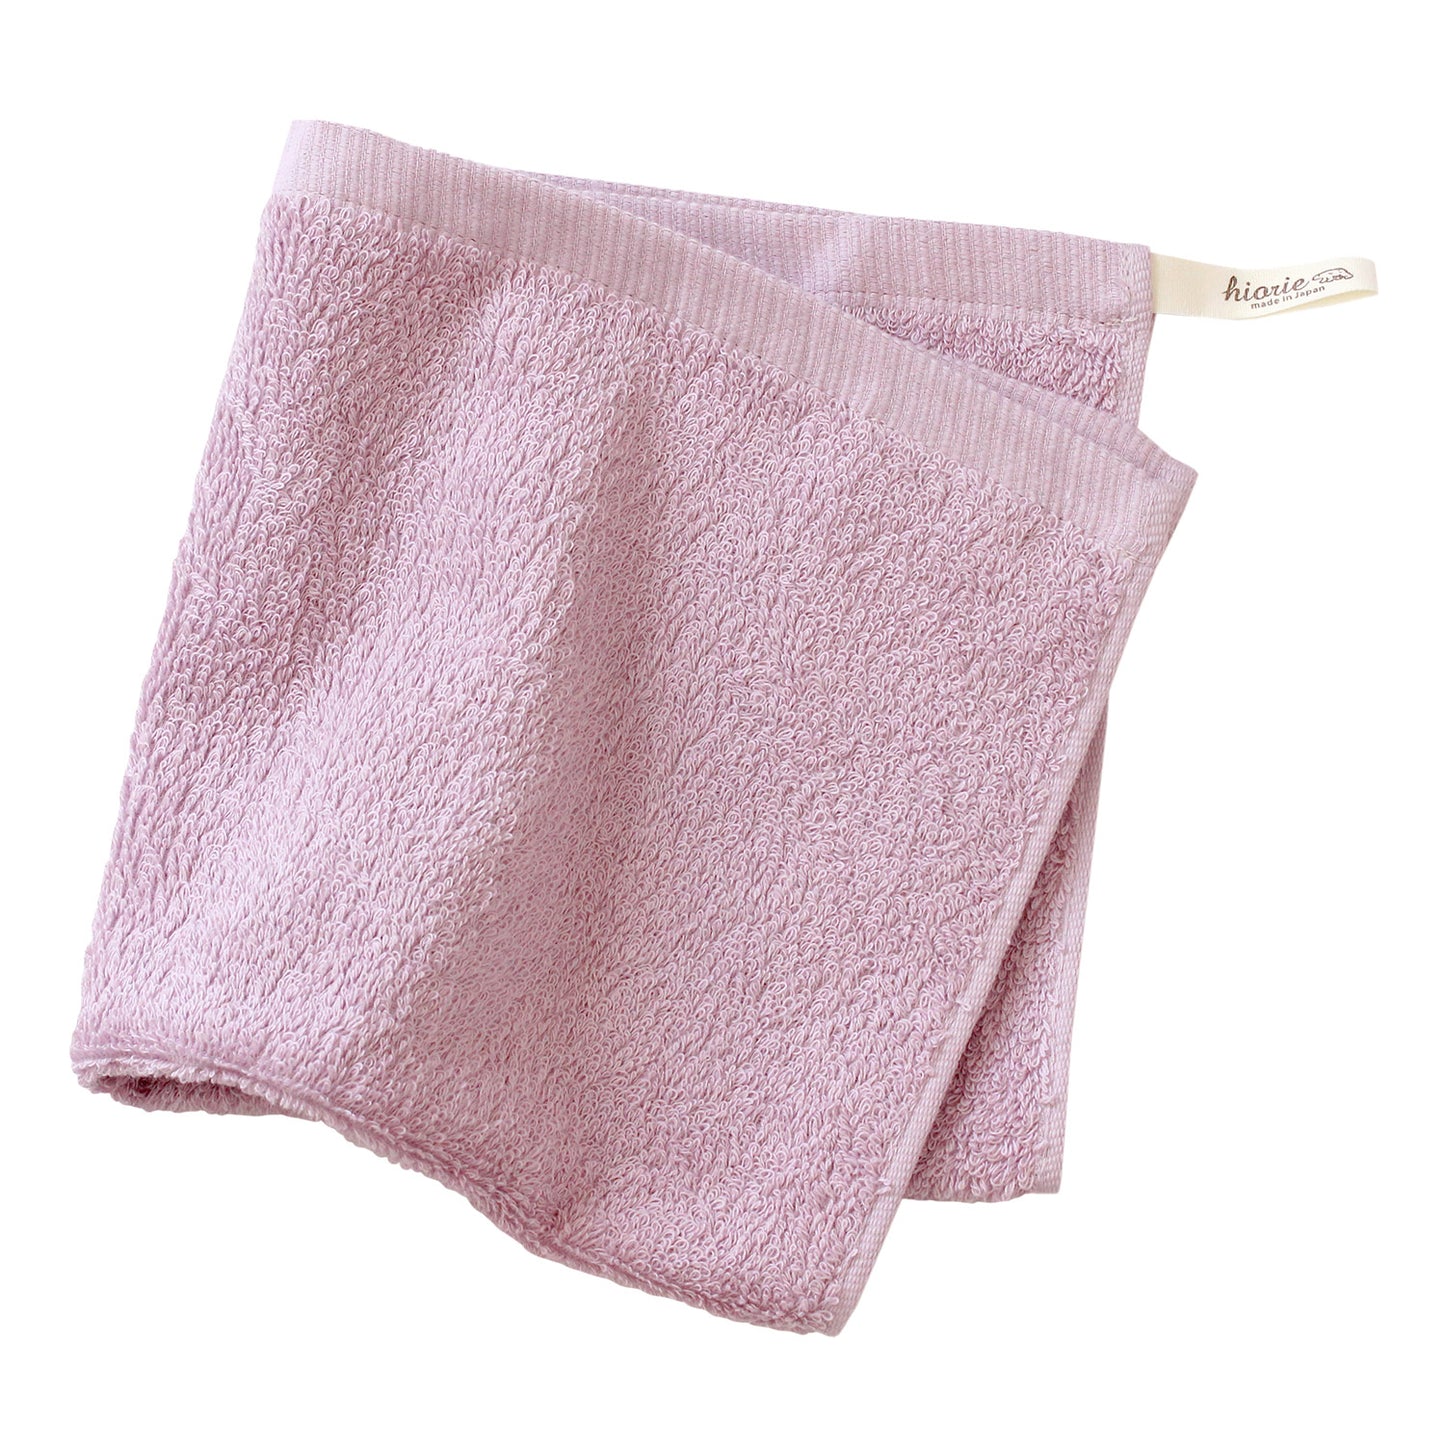 Hiorie Hotel Soft Water-Absorption Fluffy Hand Towel 1 Sheets Cotton 100% Japan